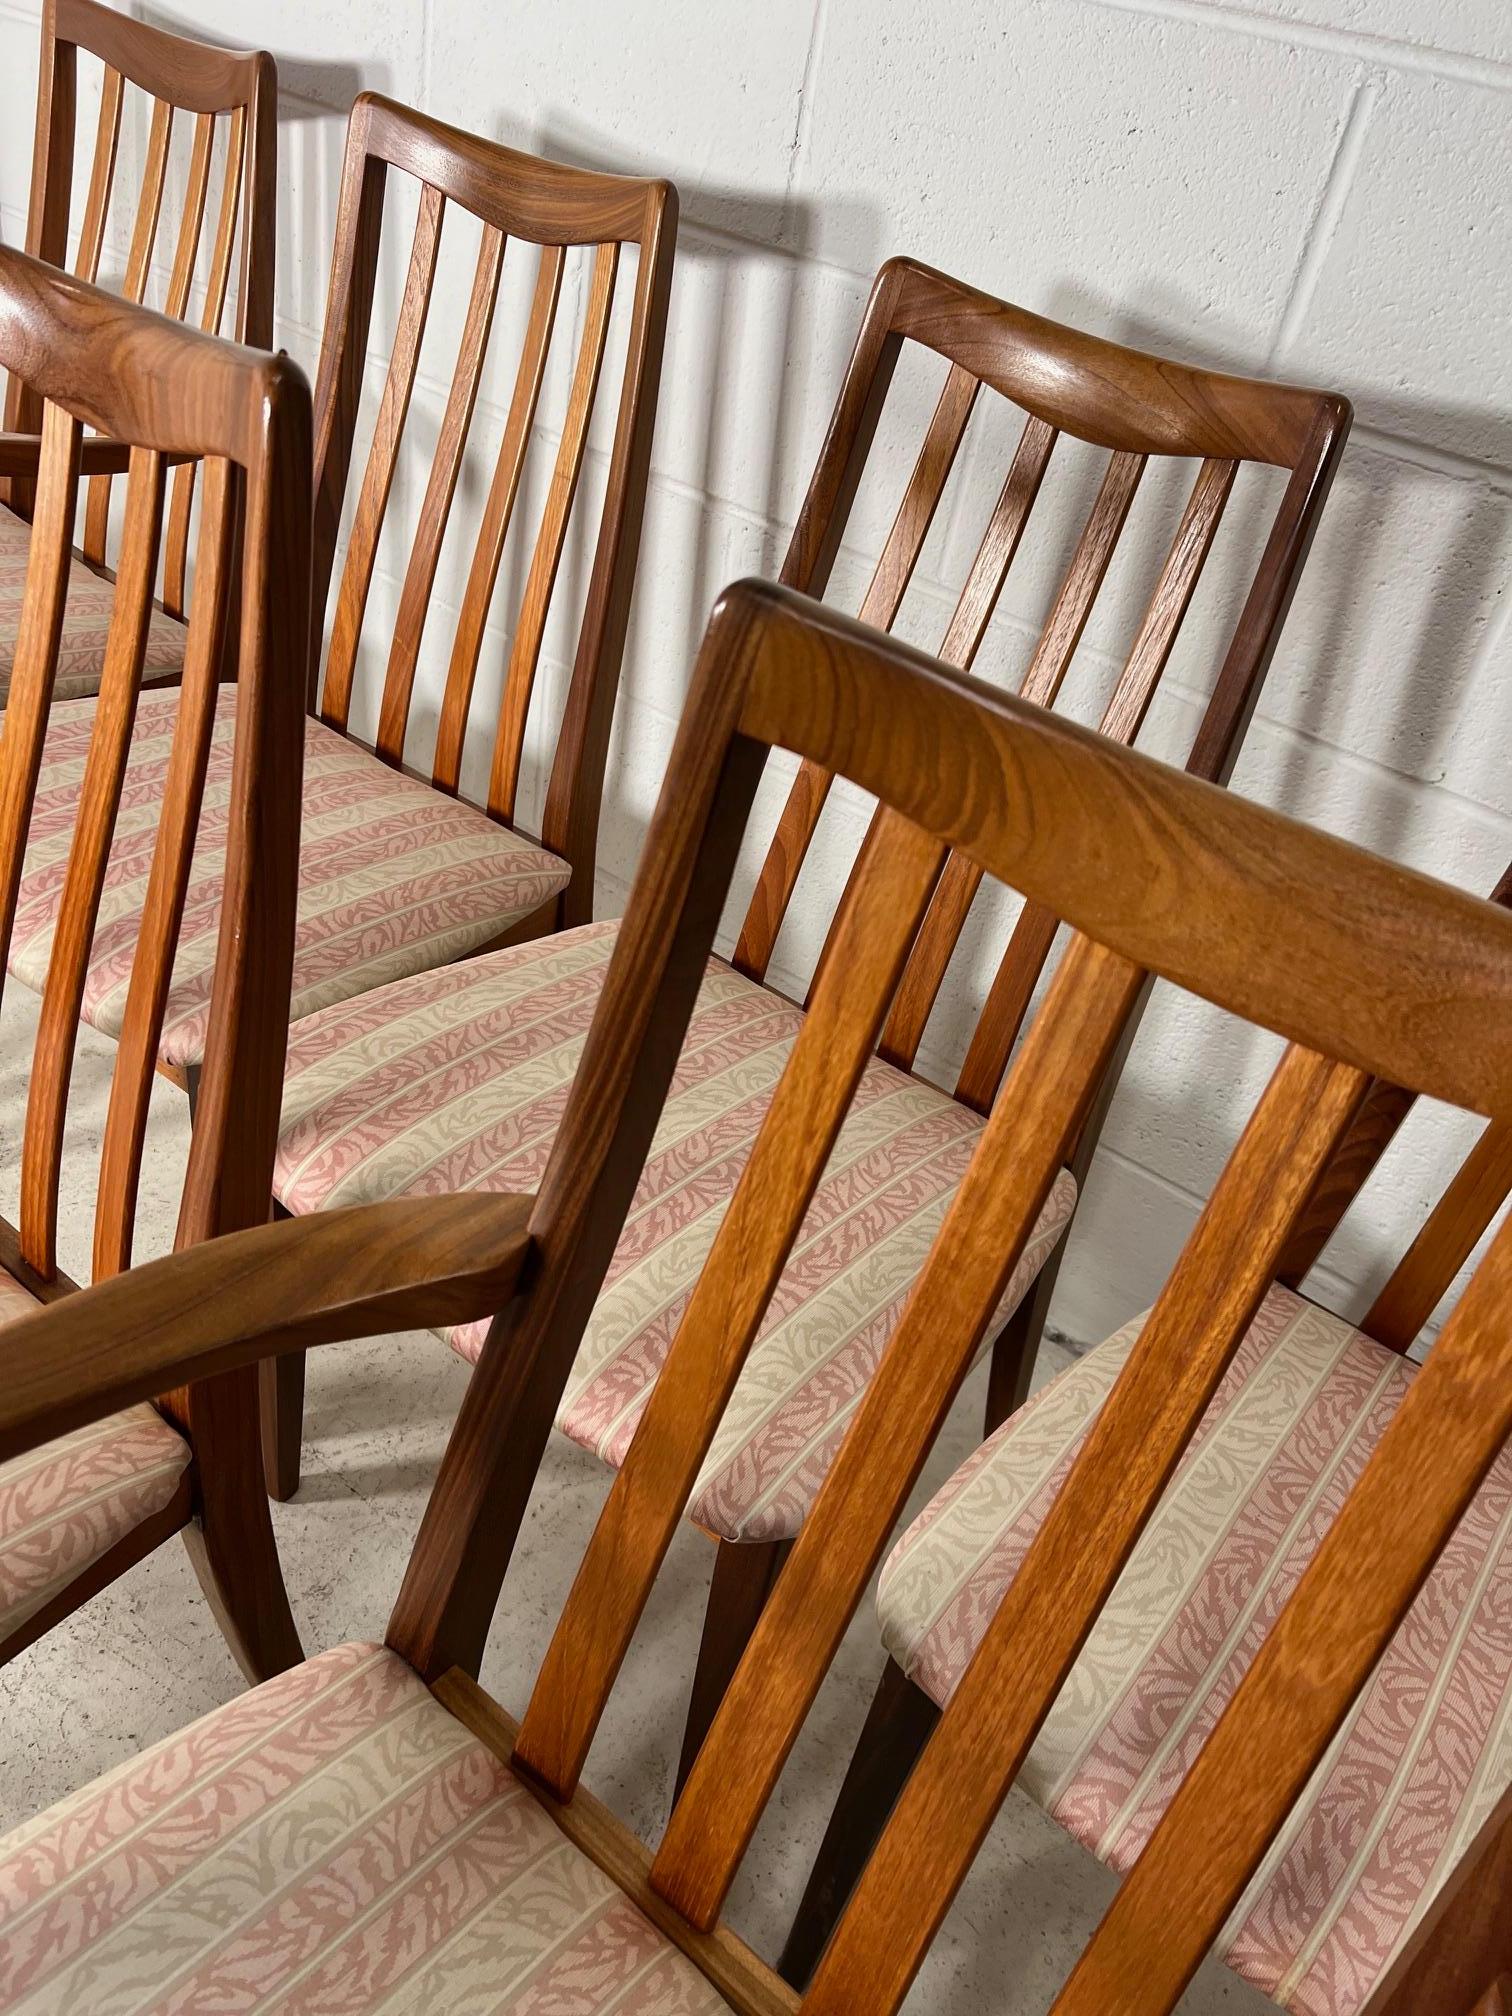 Set of 6 mid century teak chairs by G Plan.  Slat back/

Very good vintage condition. Some minor marks on the frames. Some of the chairs have had the joints glued in the past. Drop of dried up glue on the top of one back rest. All the chairs are